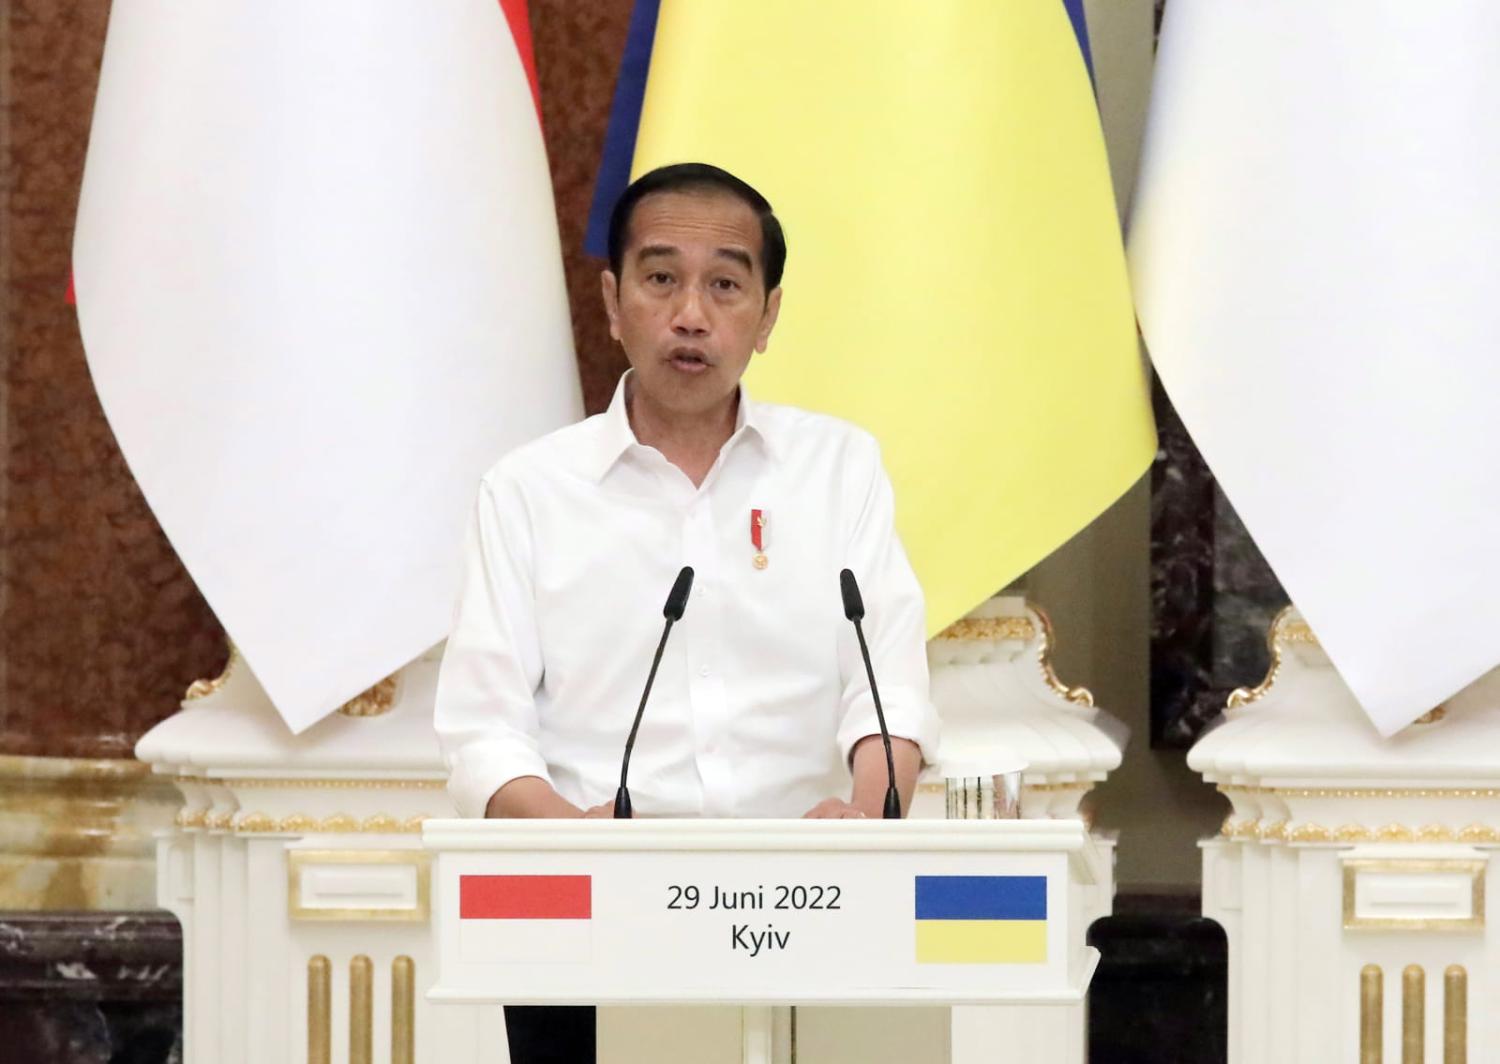 Joko Widodo speaks from the rostrum during a joint briefing with the President of Ukraine Volodymyr Zelenskyy in Kyiv (Volodymyr Tarasov via Getty Images)